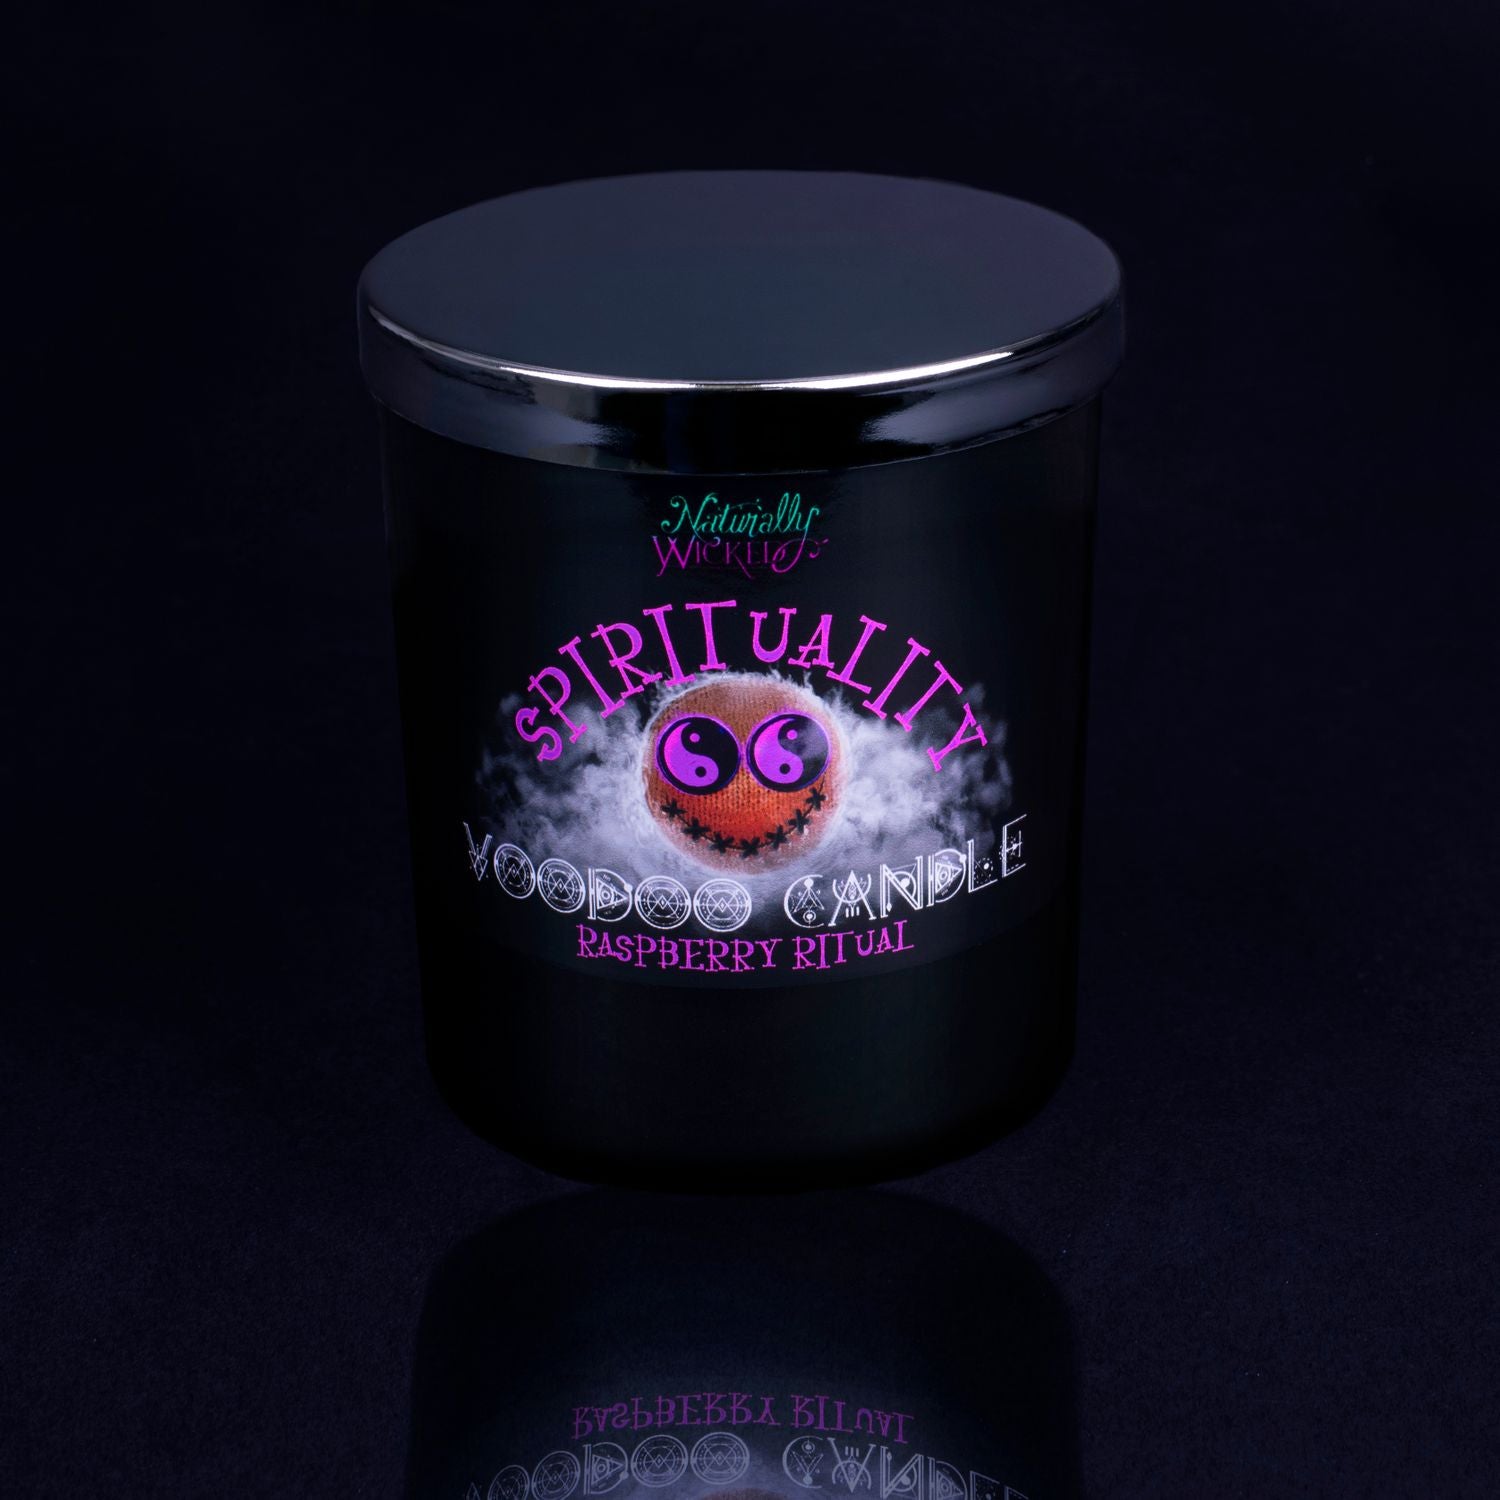 Naturally Wicked Voodoo Spirituality Spell Candle With Mirror Finished Exquisite Lid In Place. Featuring A Black Gloss Label, A Voodoo Doll Design And Raspberry Ritual Scent.